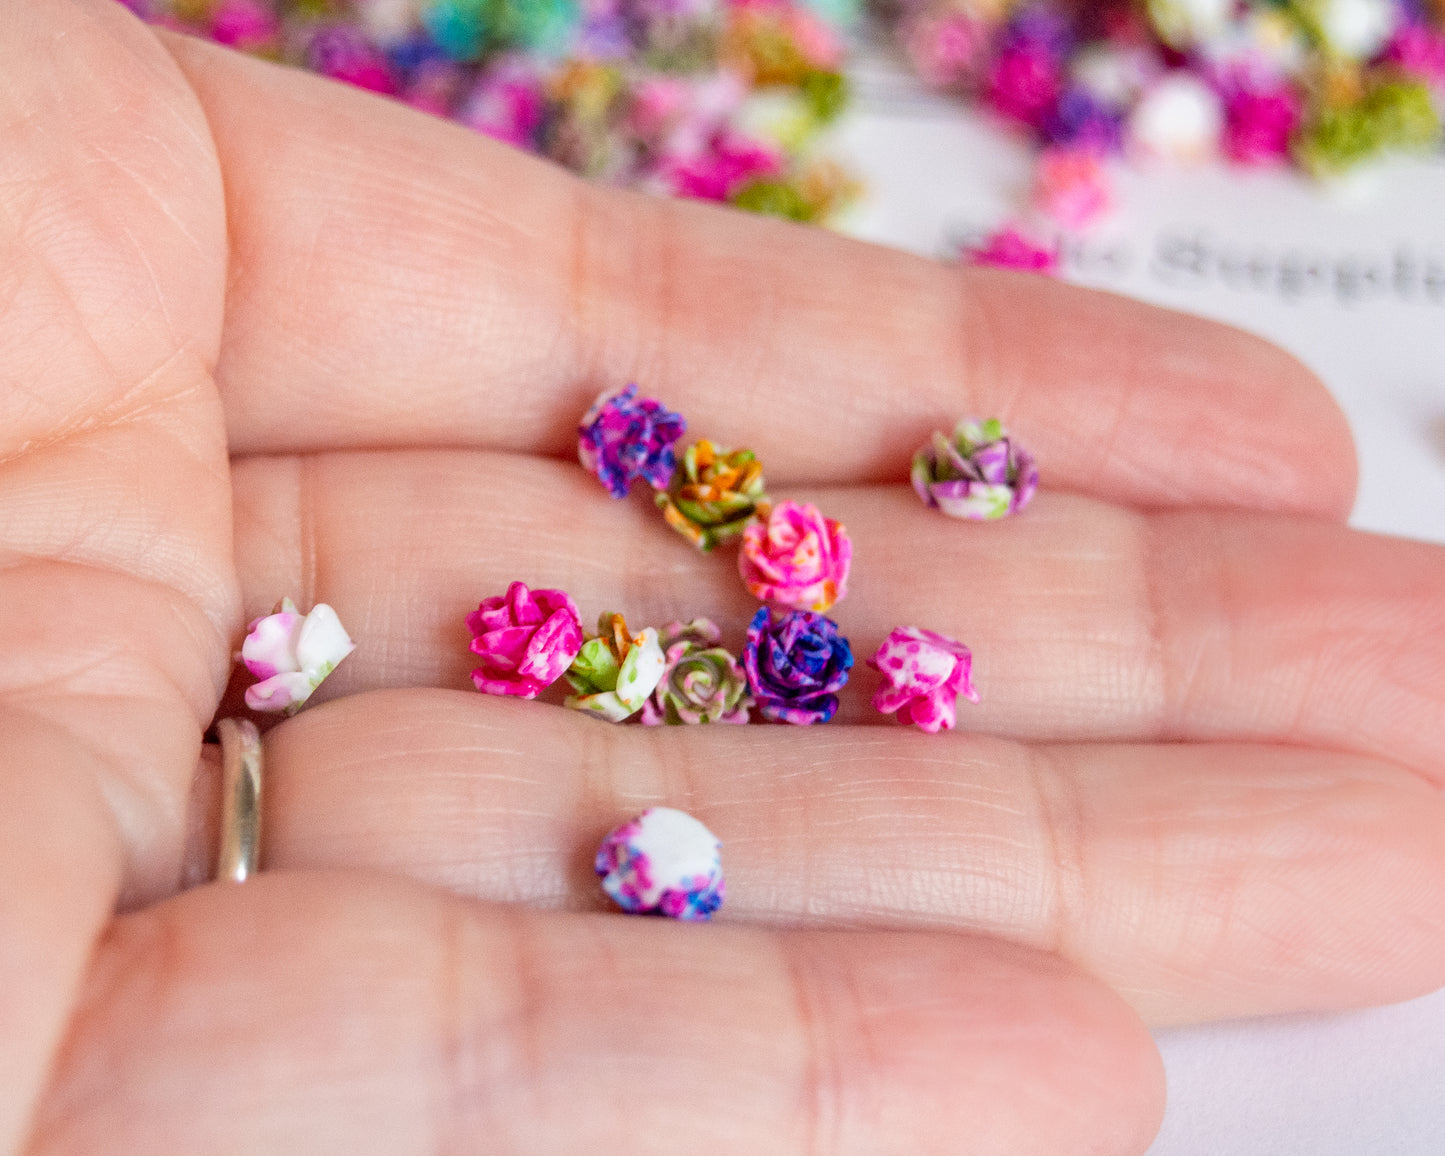 6x4.5mm Splatter Painted Rose Cabochons in Colorful Resin